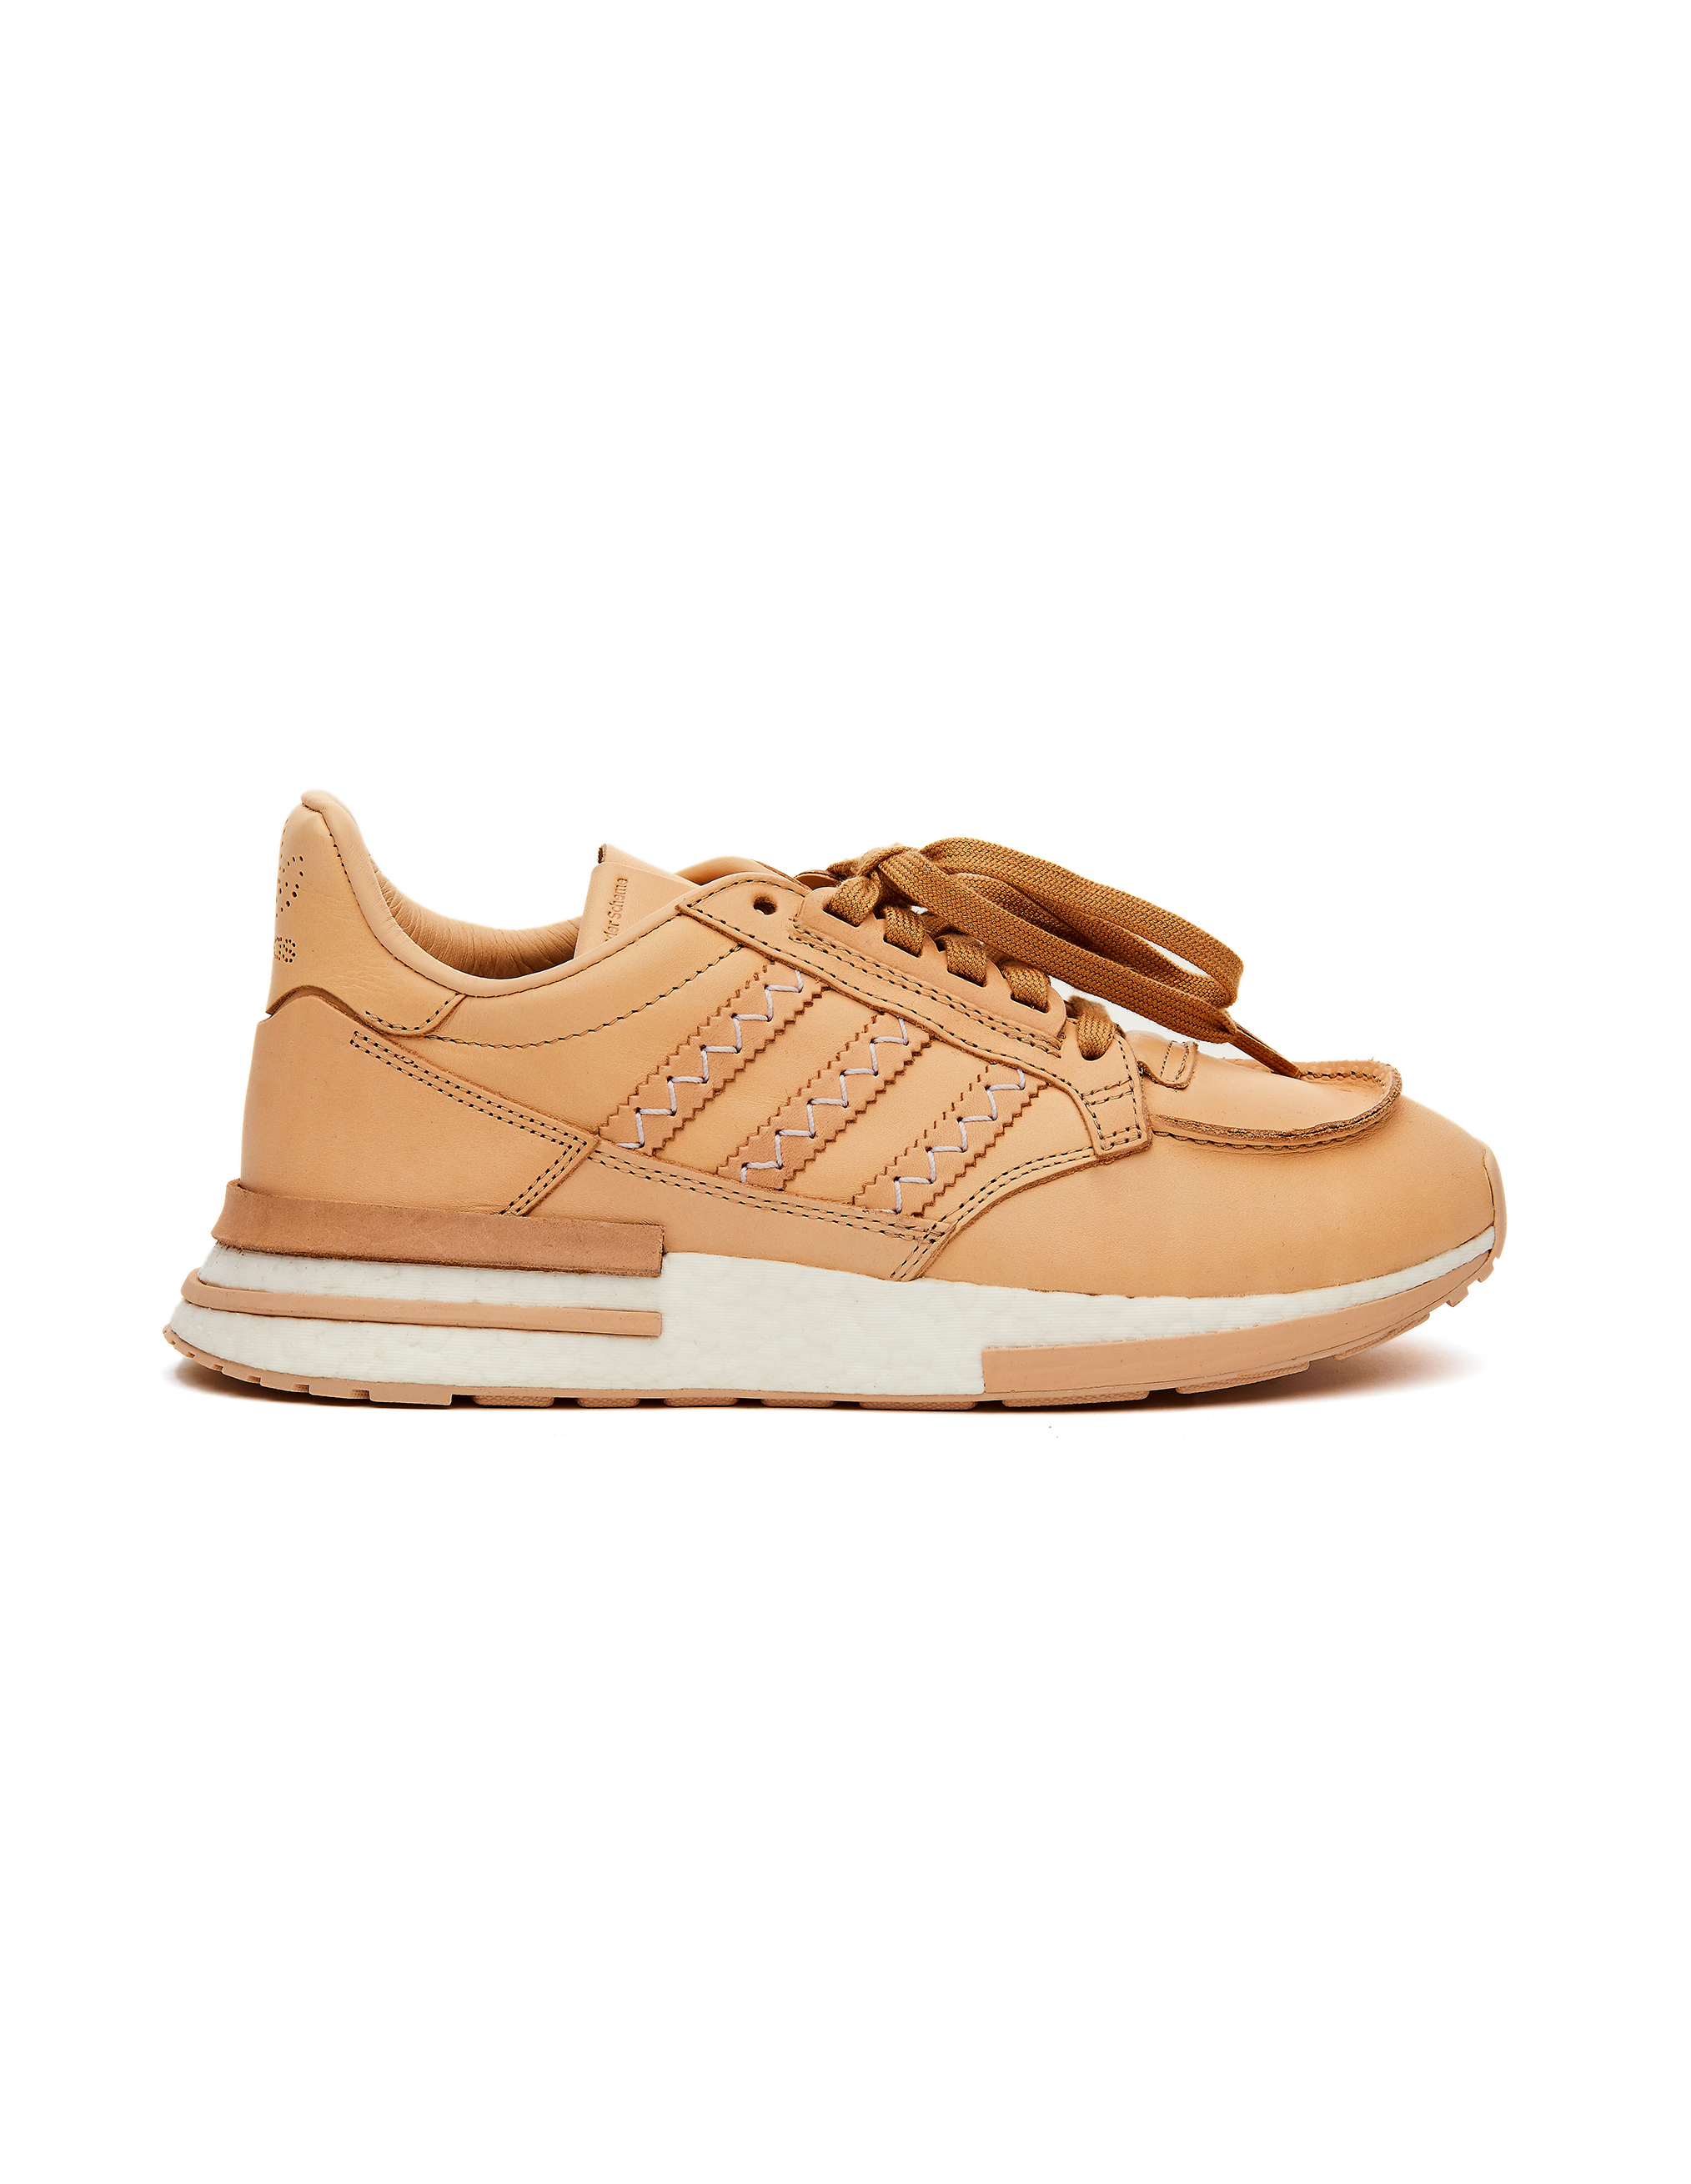 

Adidas ZX 500 RM Leather Sneakers